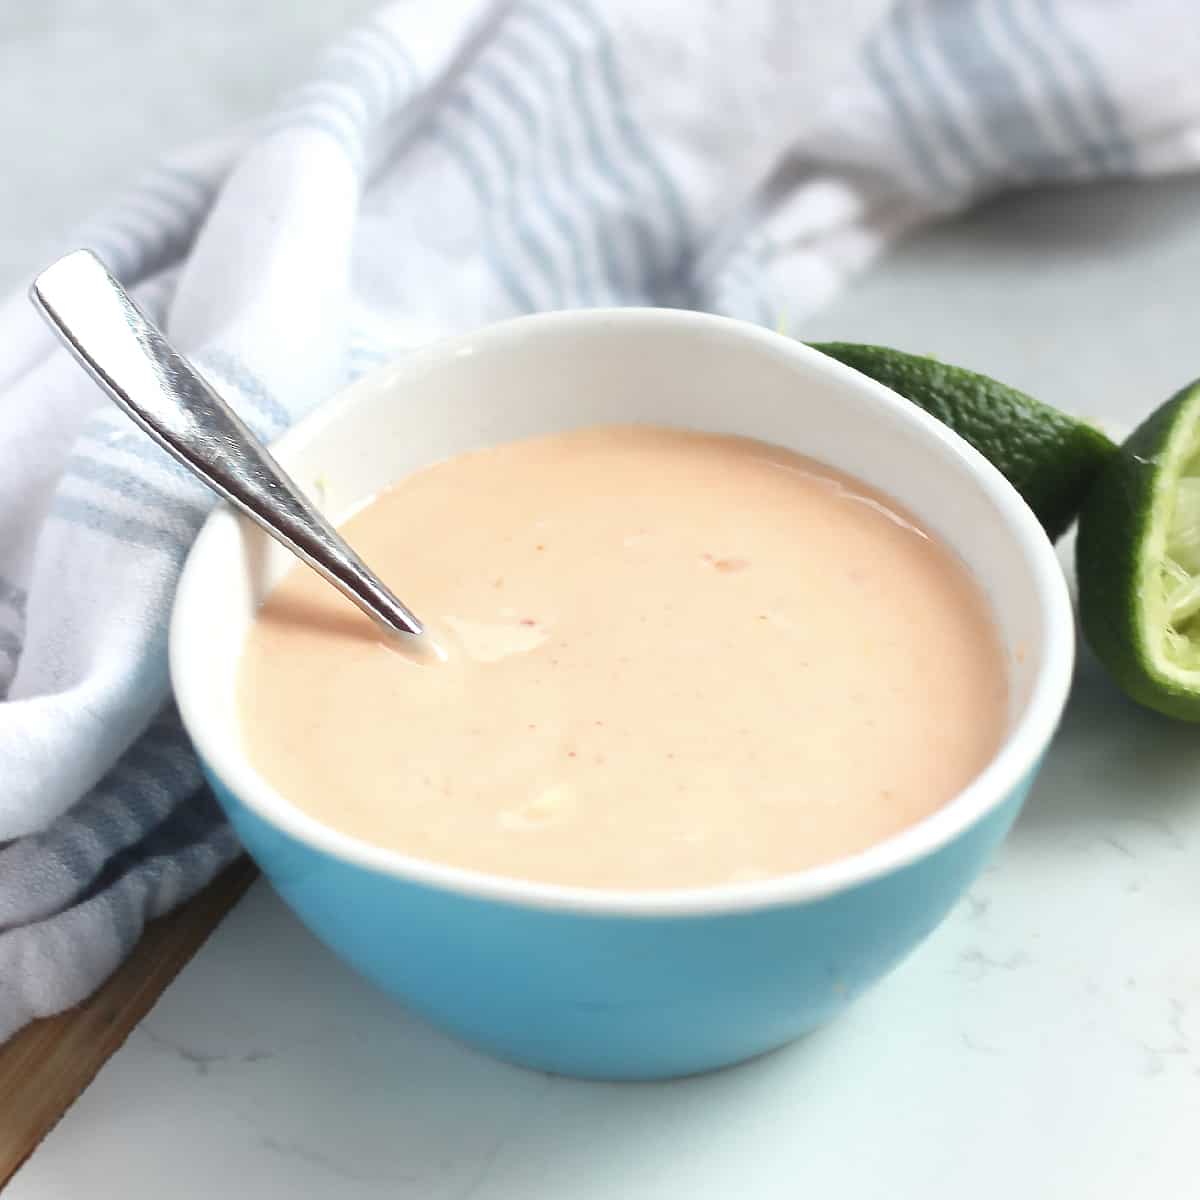 A spoon in a bowl of creamy sweet chili dipping sauce.